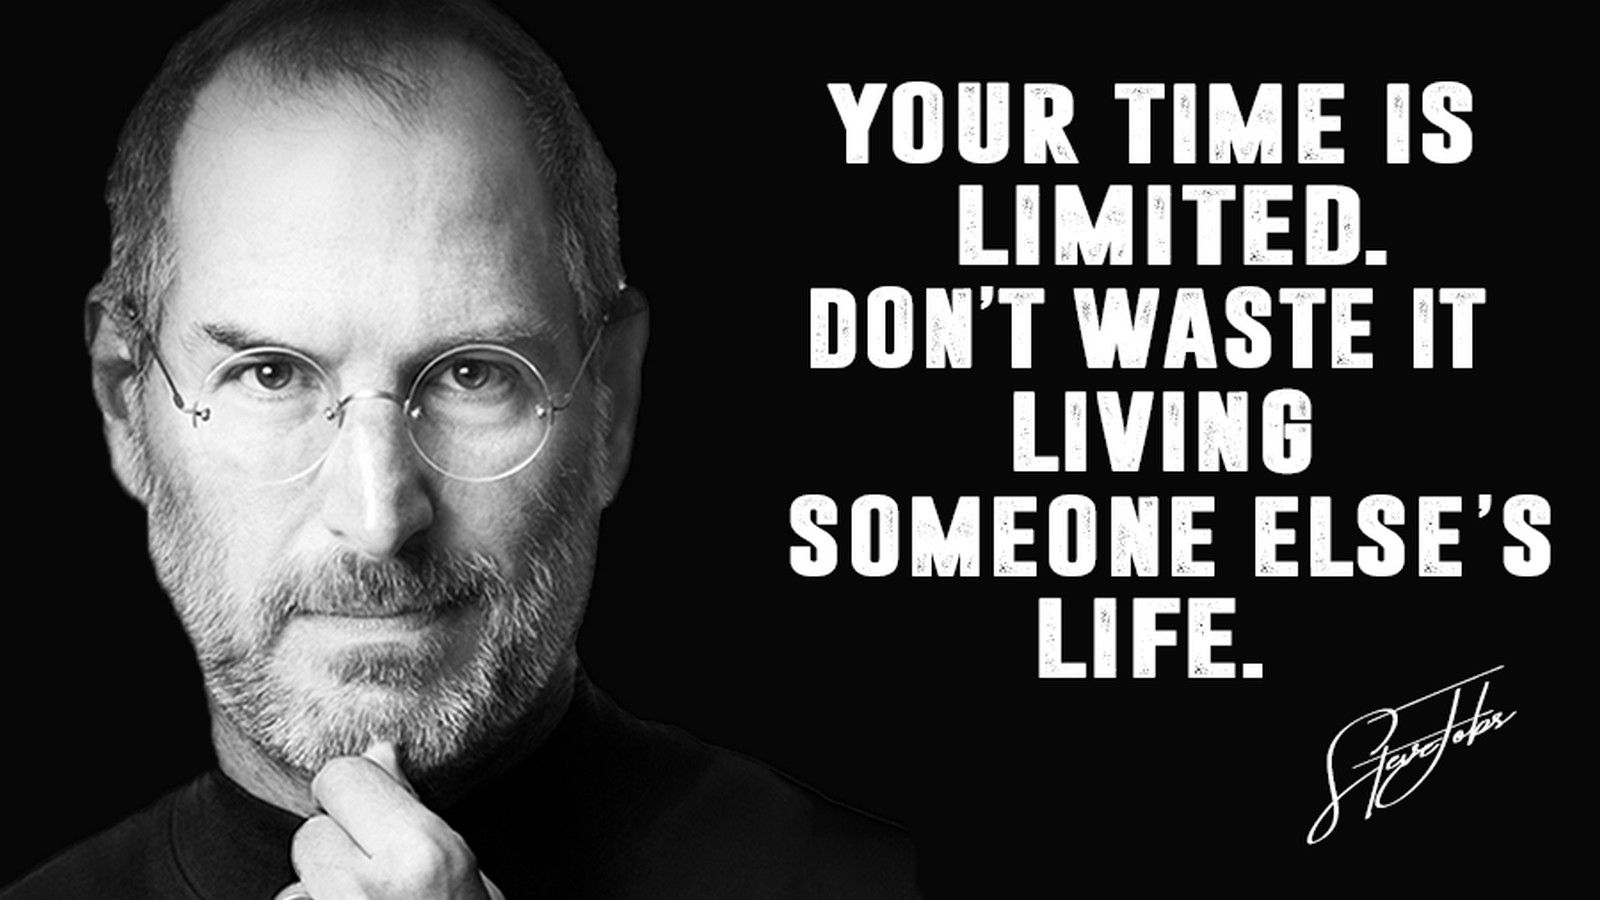 Steve Jobs Quotes Wallpaper | Time Language | Flickr